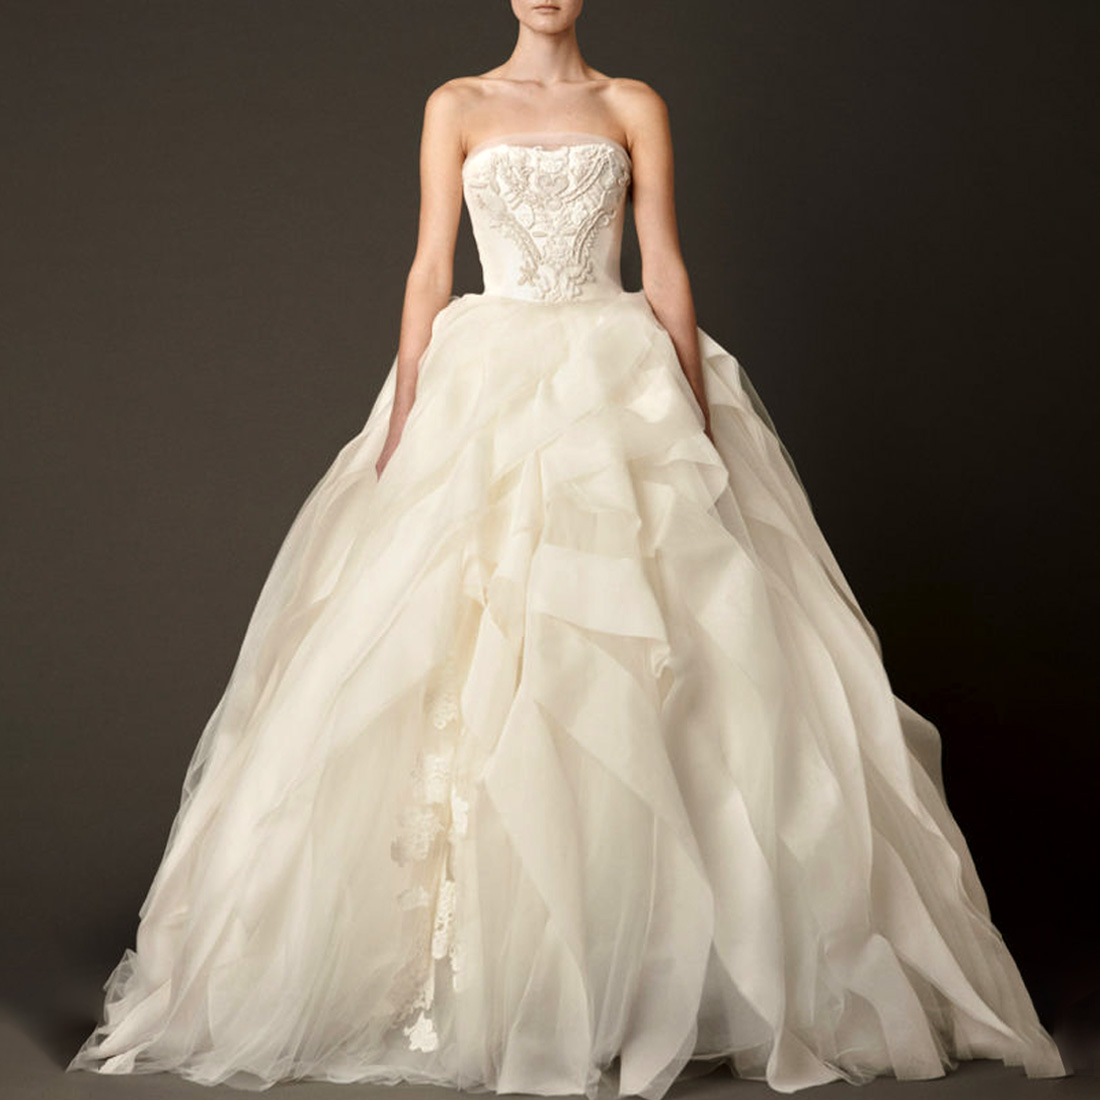 Vera Wang Liesel Iconic Bridal Gown in Ivory The Lux Portal